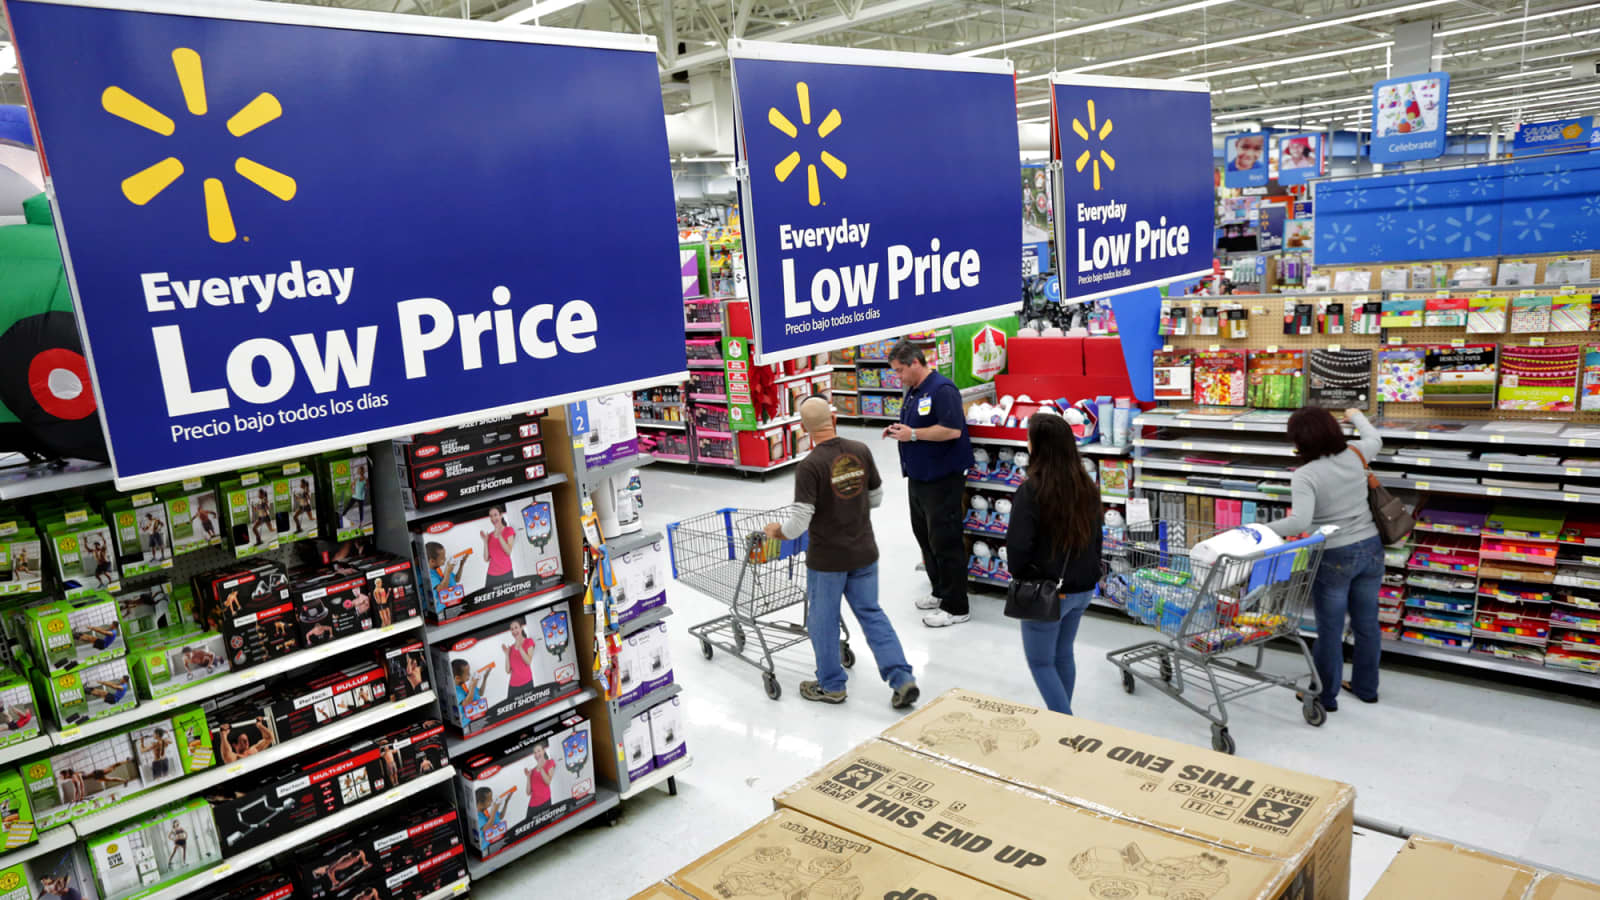 Wal-Mart's US chief takes aim at urgent item: Theft